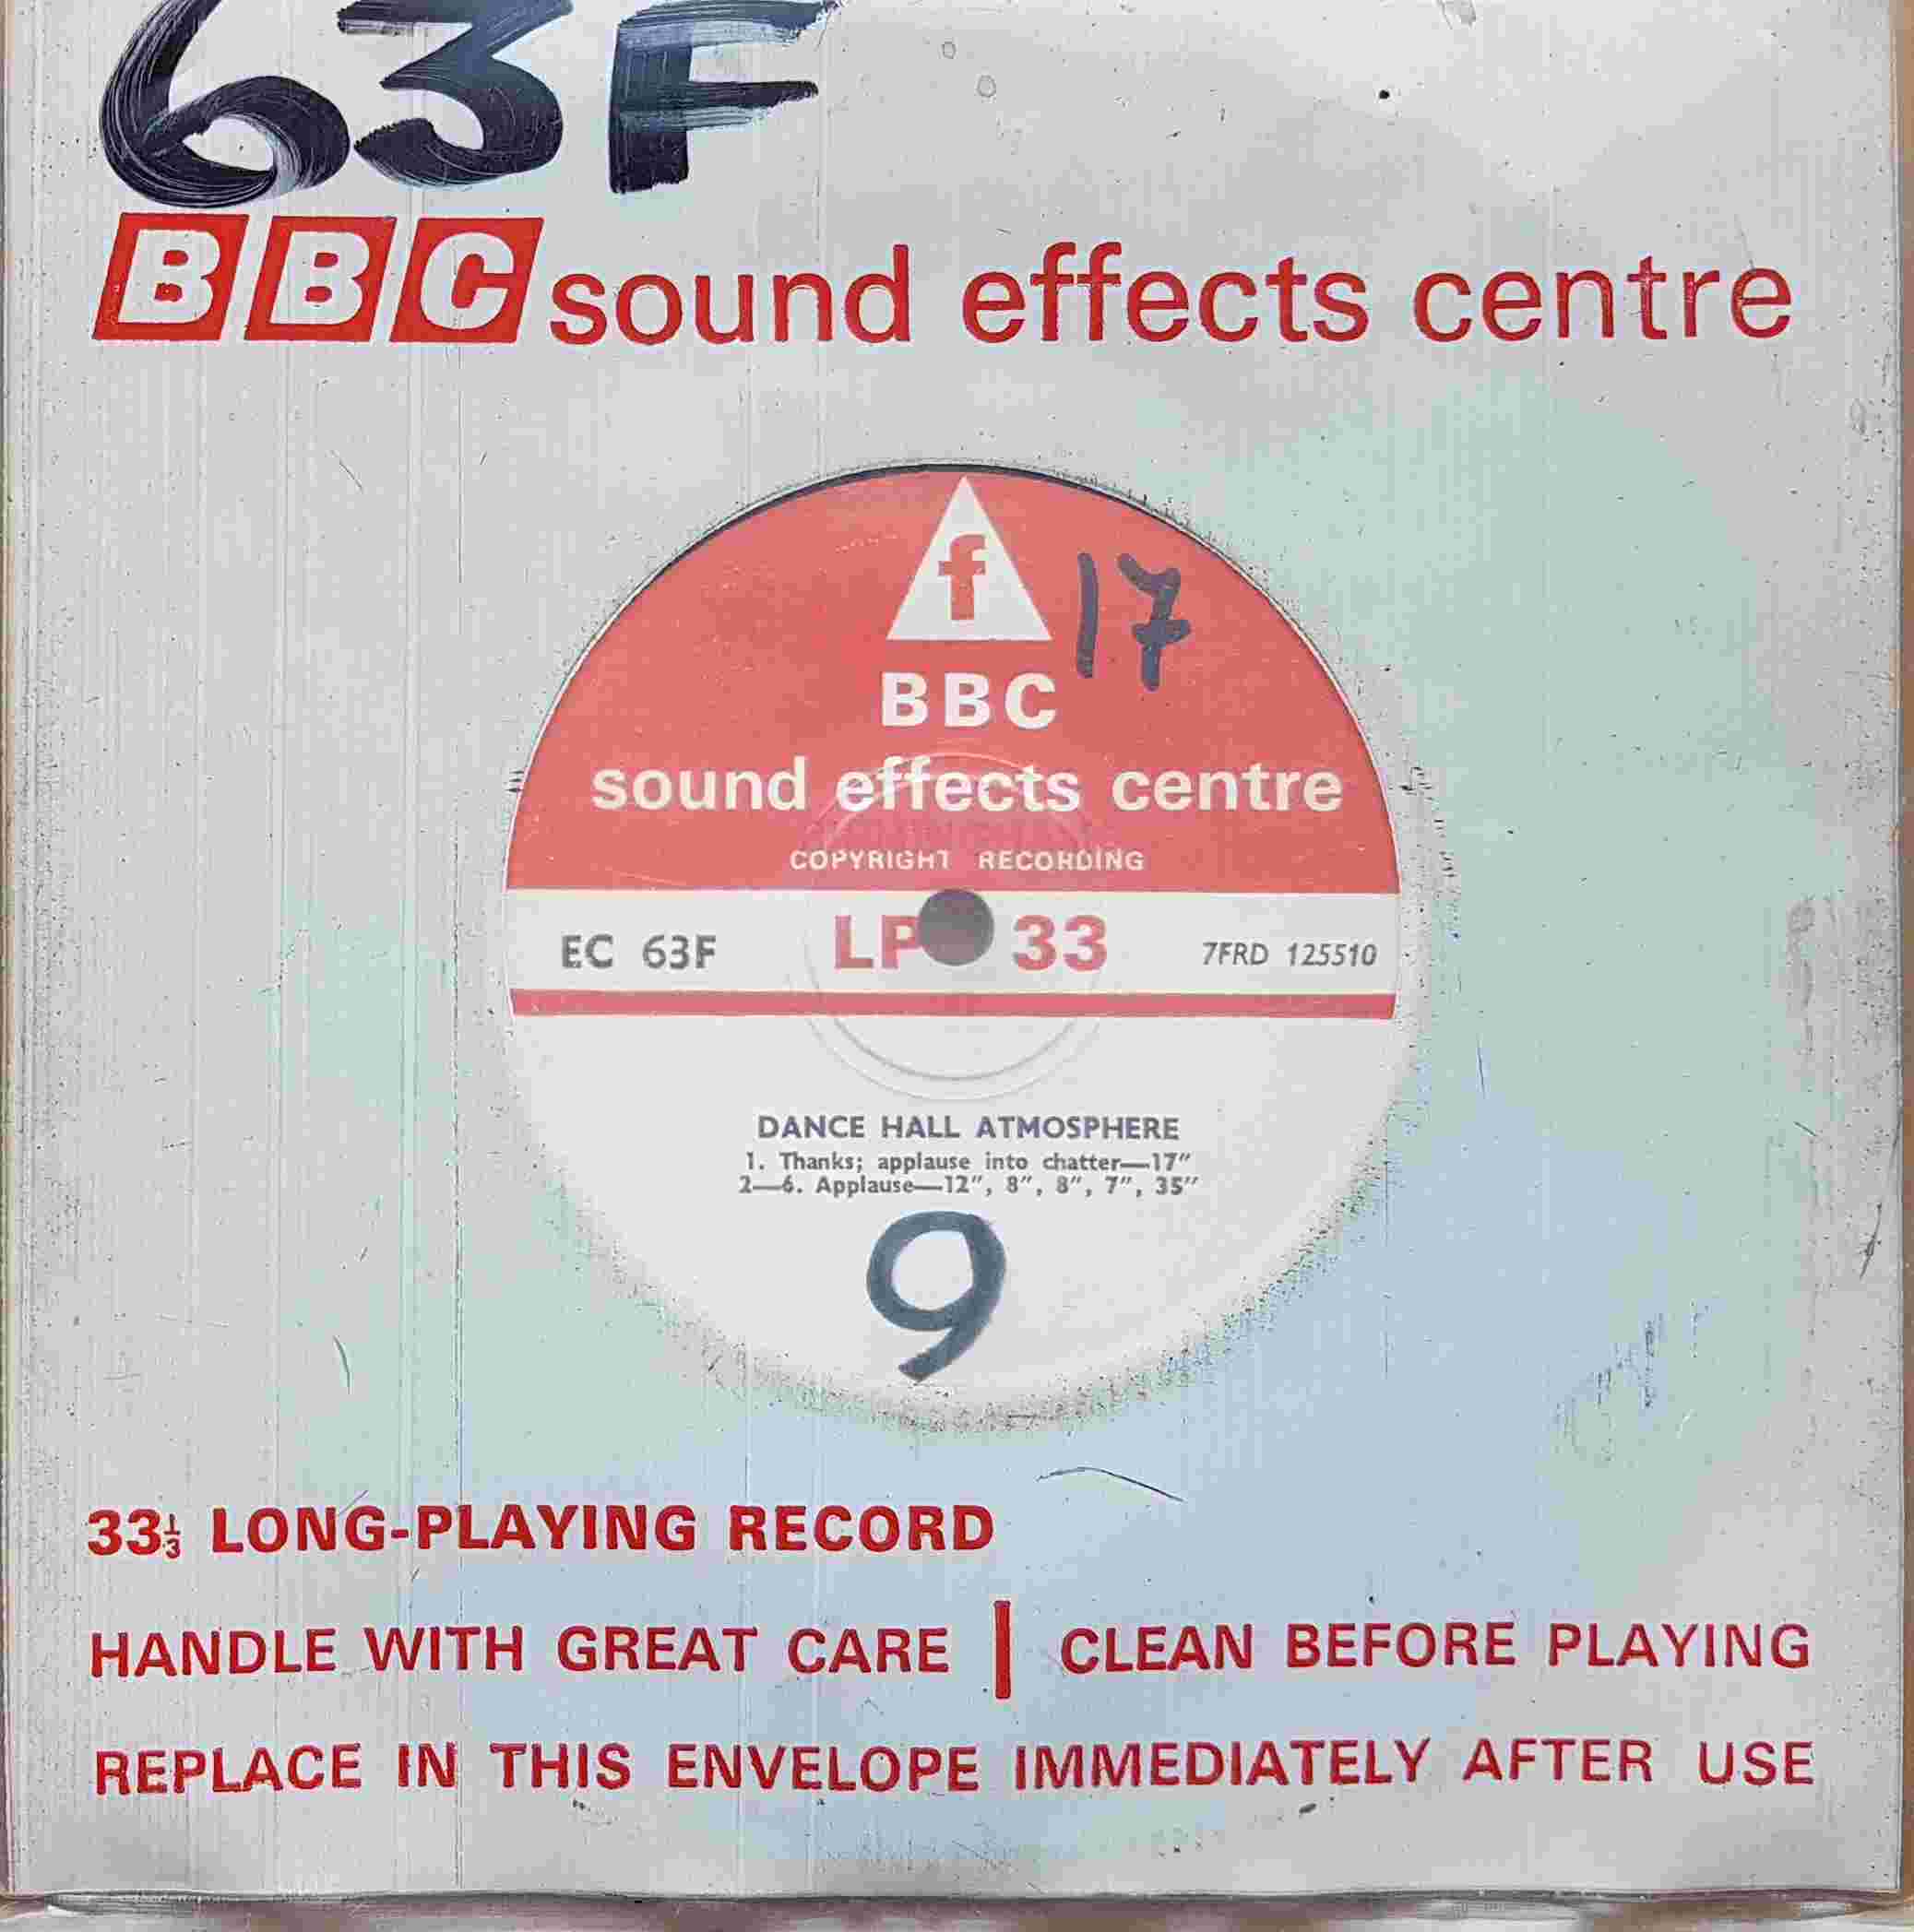 Picture of EC 63F Dance Hall atmosphere by artist Not registered from the BBC records and Tapes library